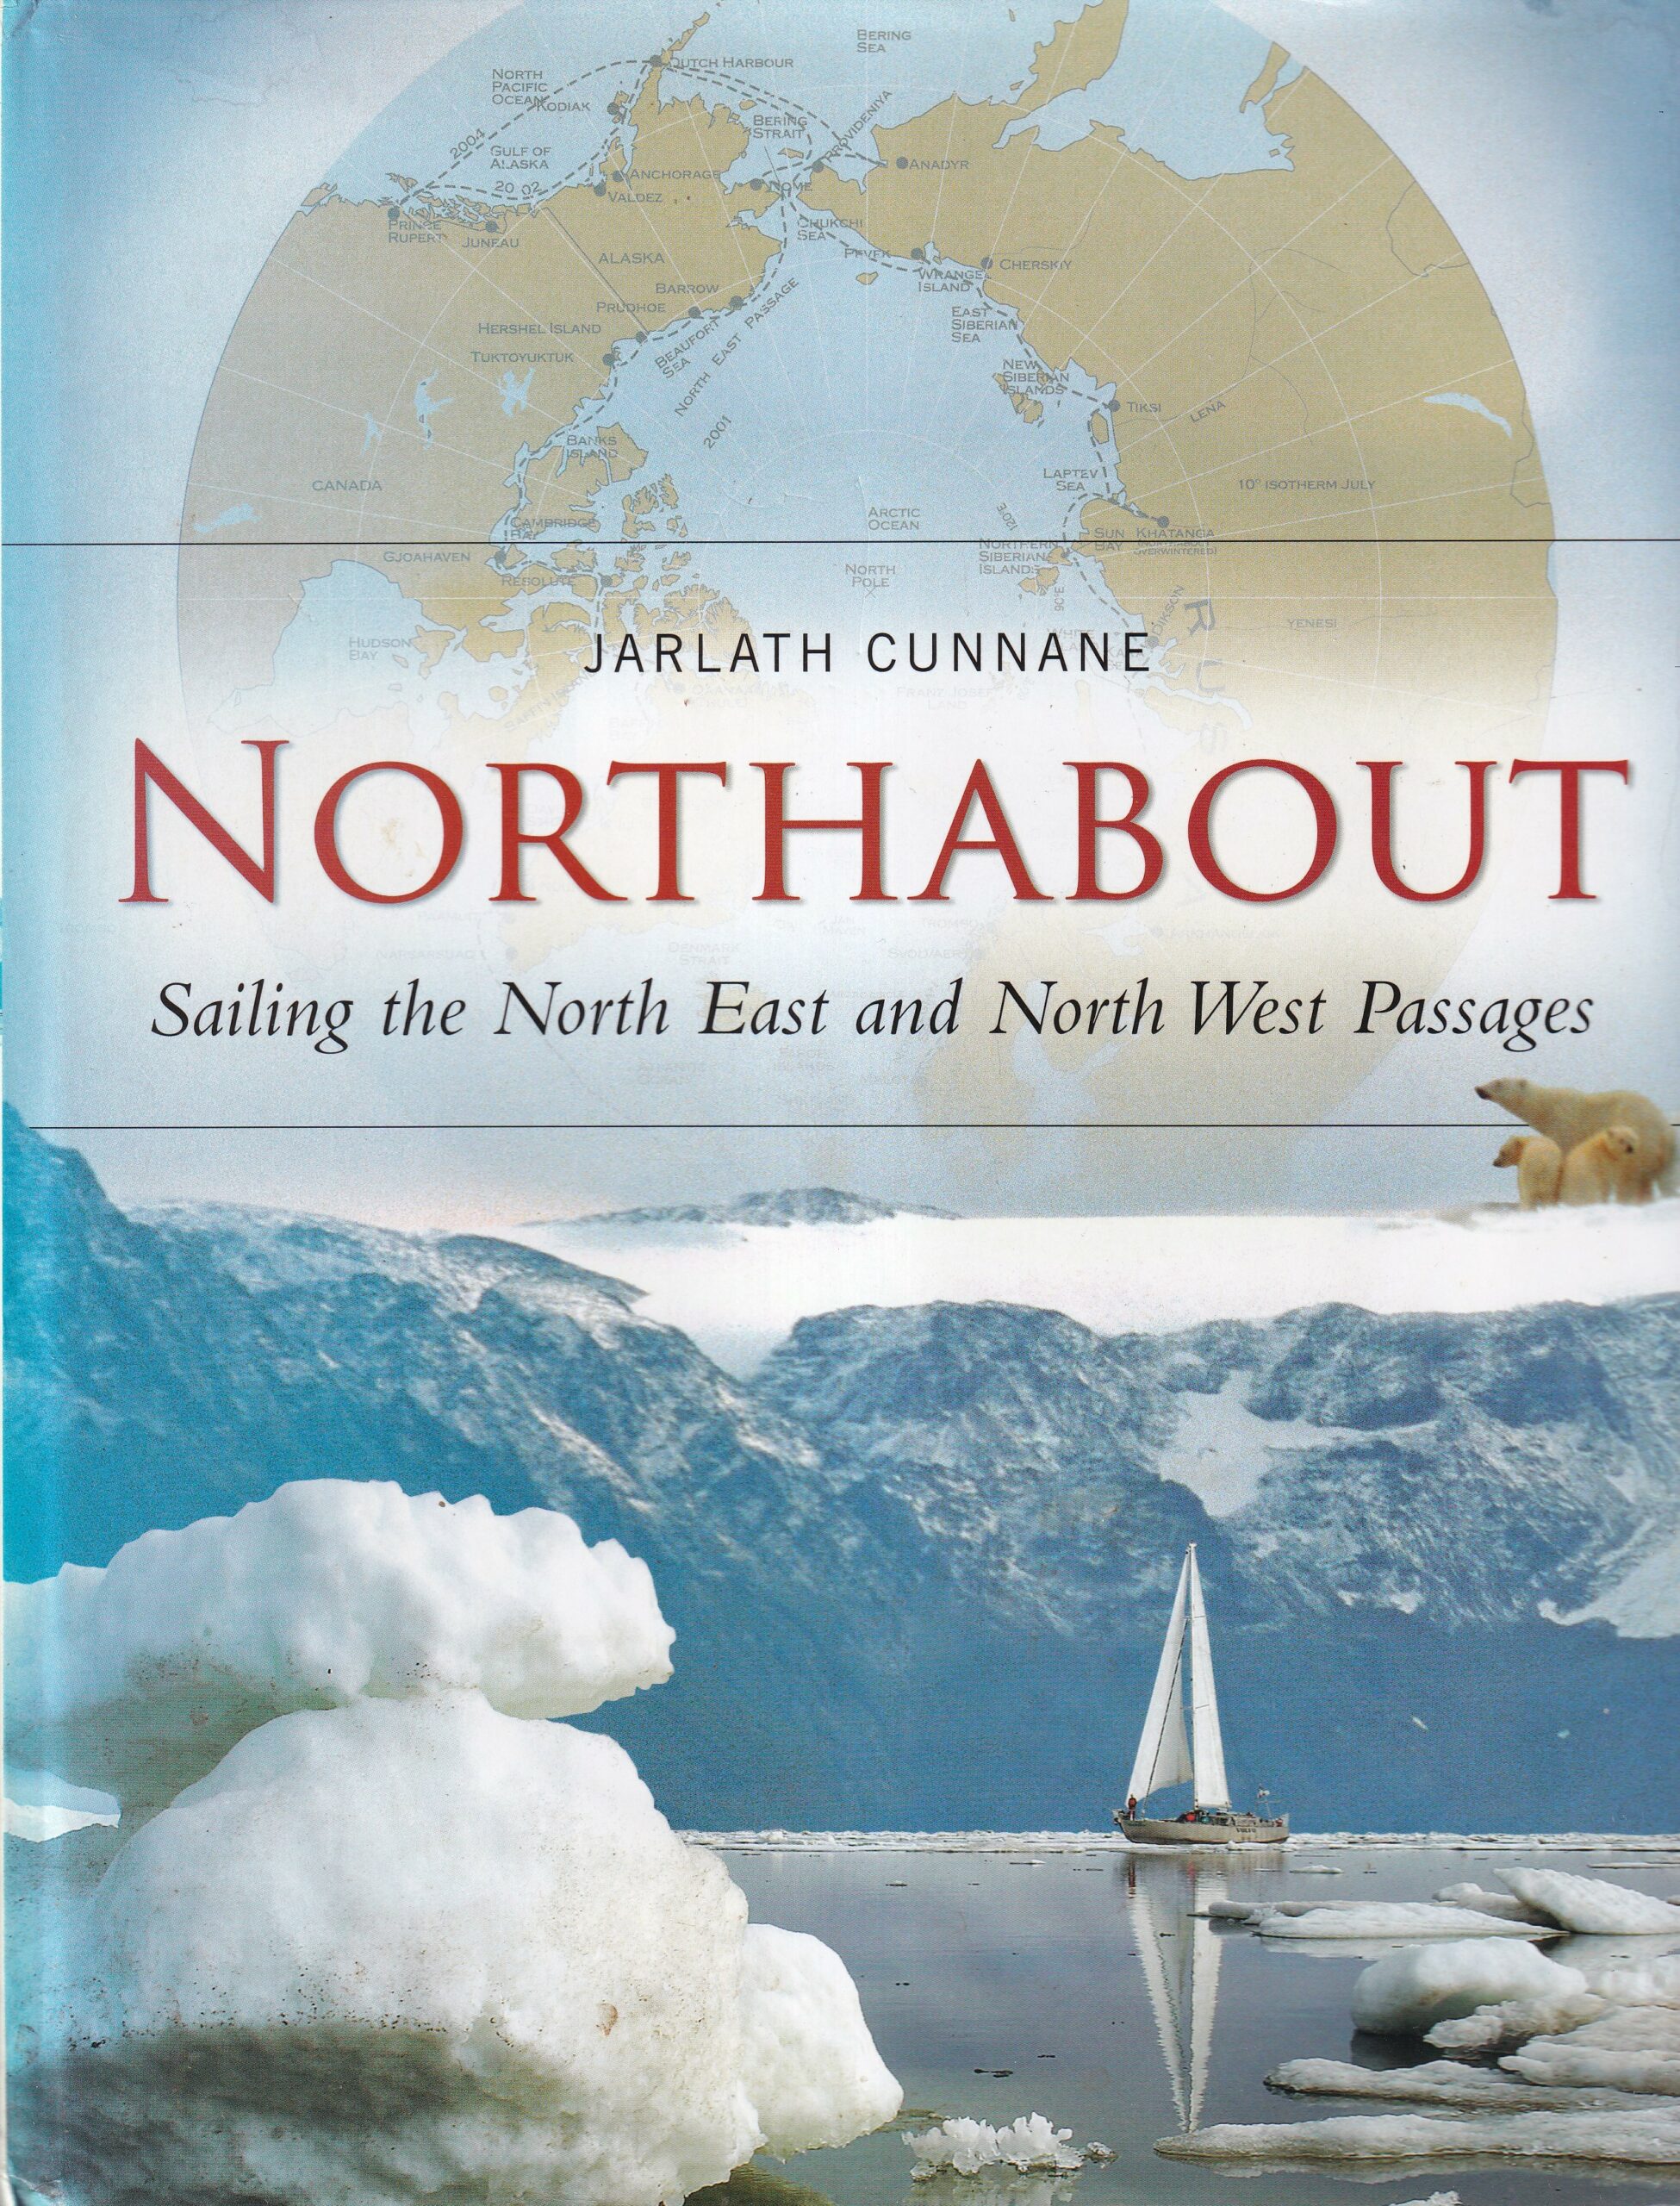 Northabout: Sailing the North East and North West Passages- Signed by Jarlath Cunnane